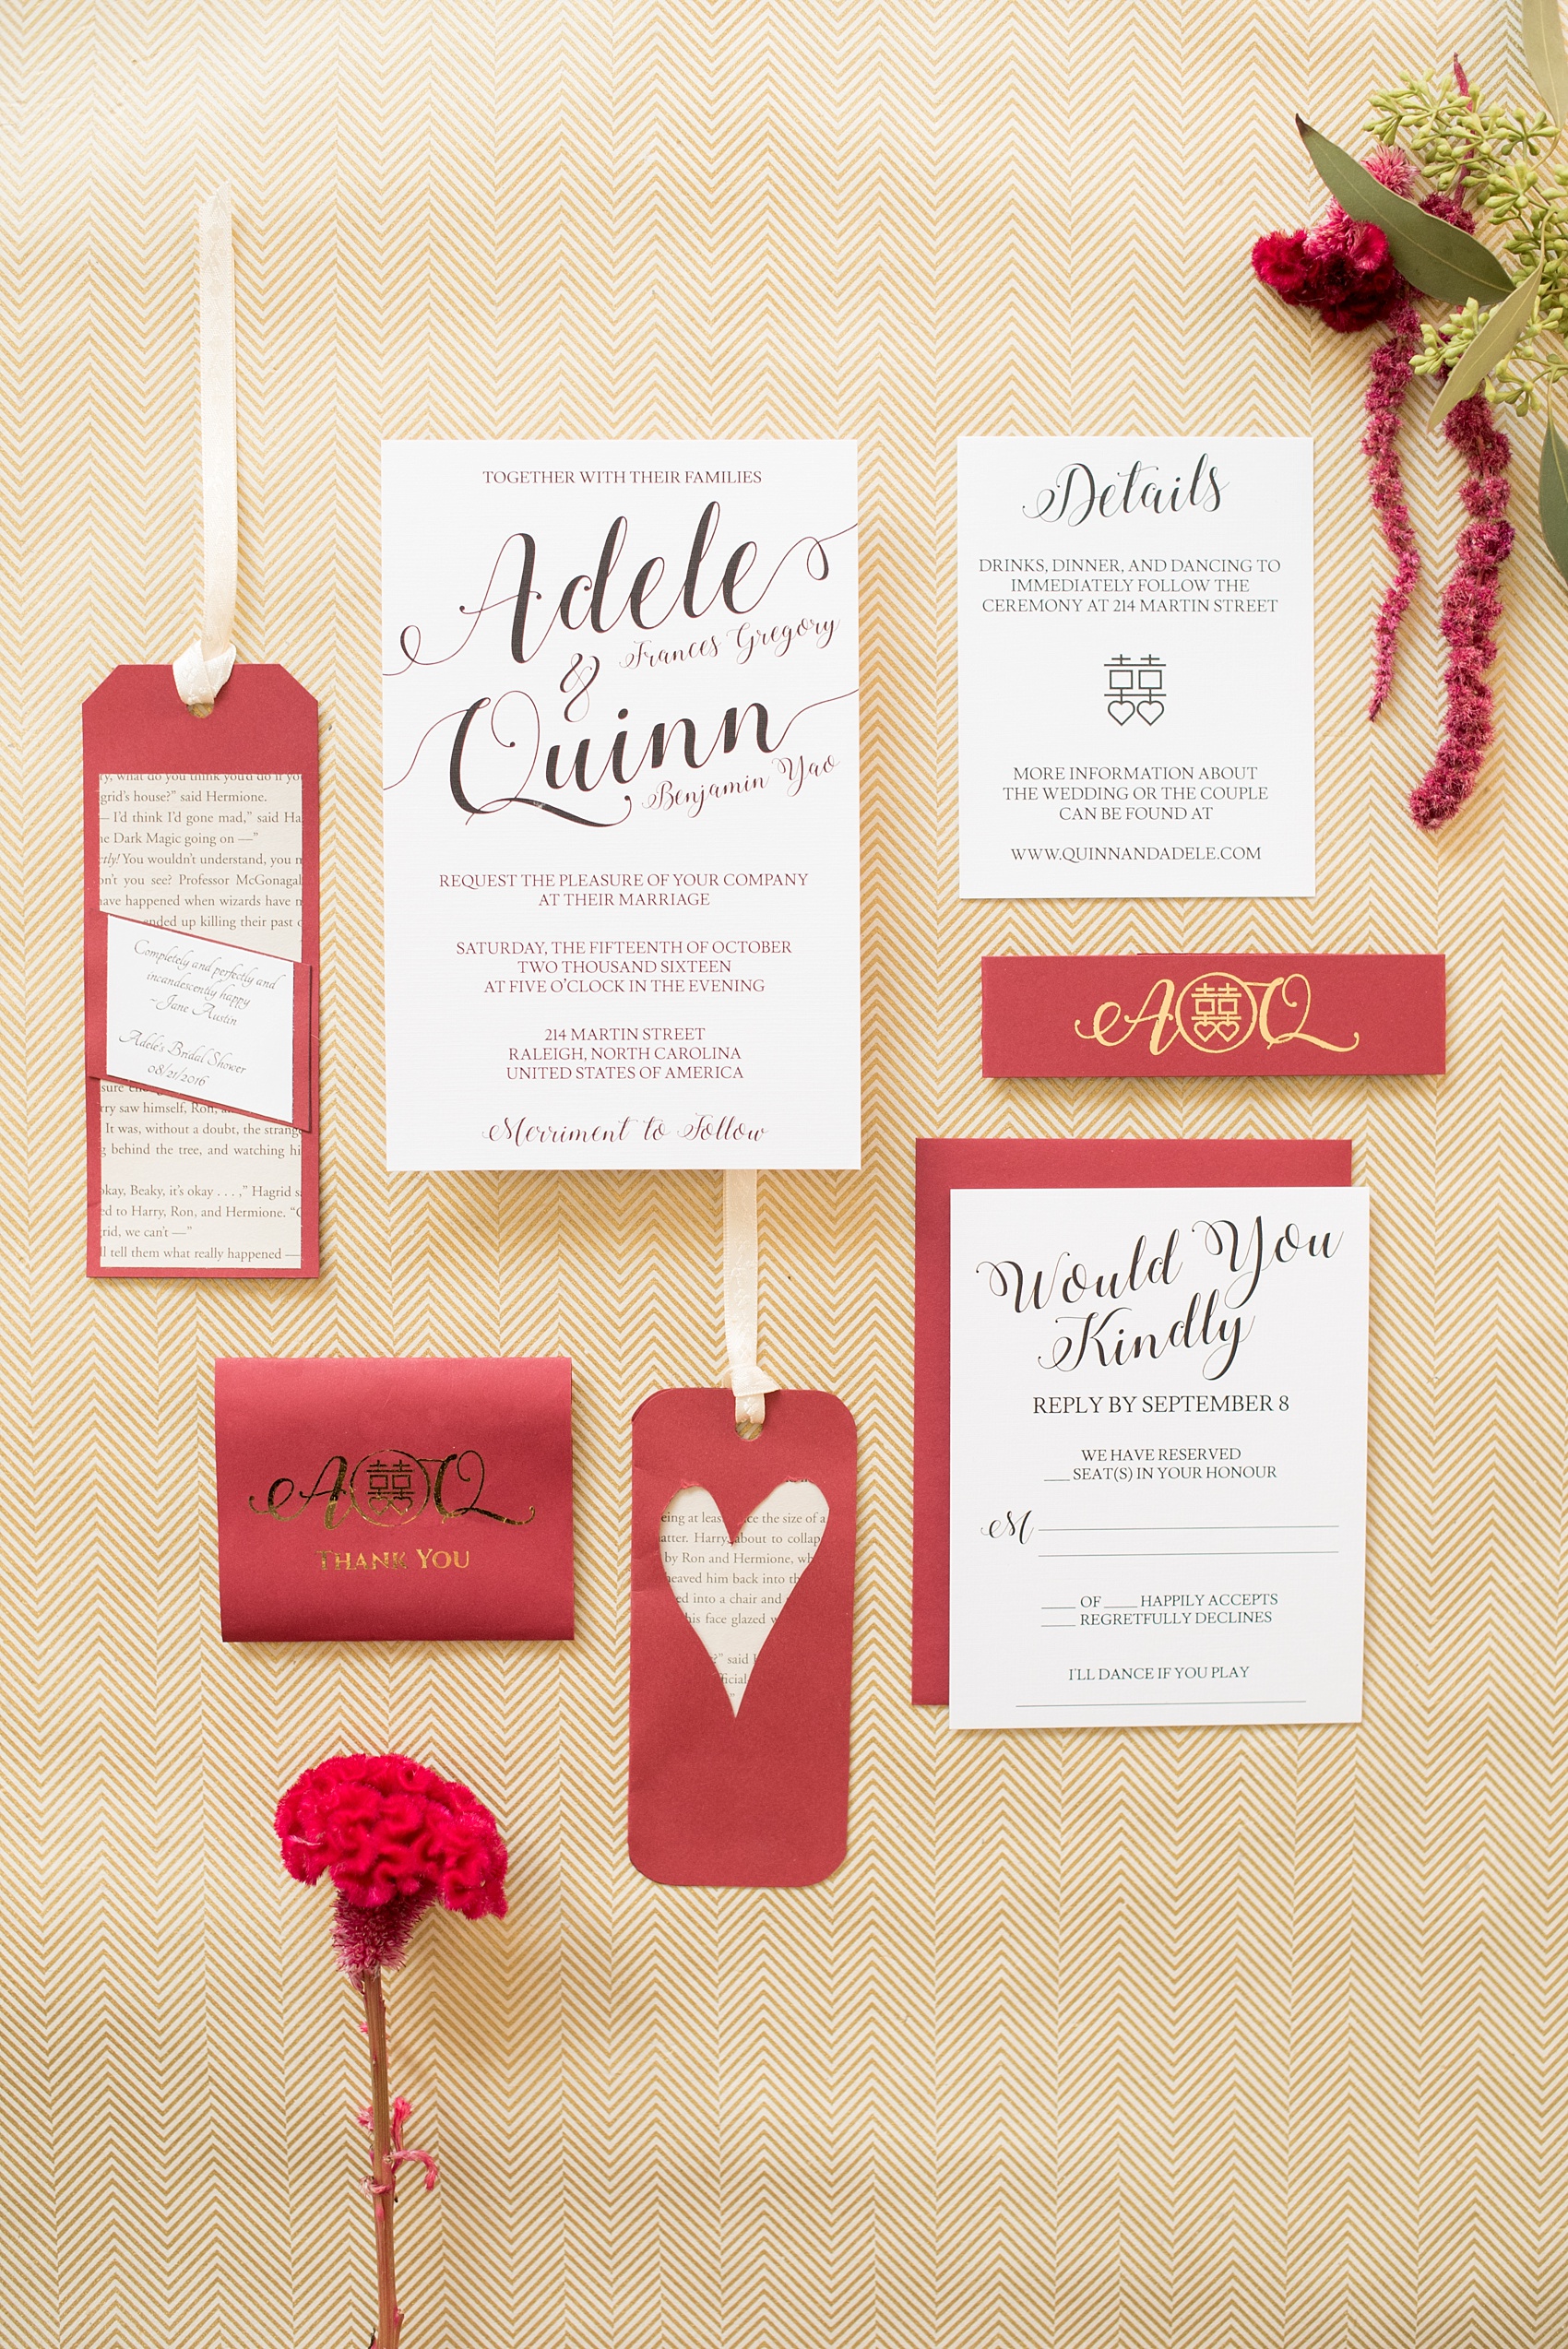 Mikkel Paige Photography photos from a wedding at 214 Martin Street in downtown Raleigh. Red and gold invitation set for a fall ceremony.